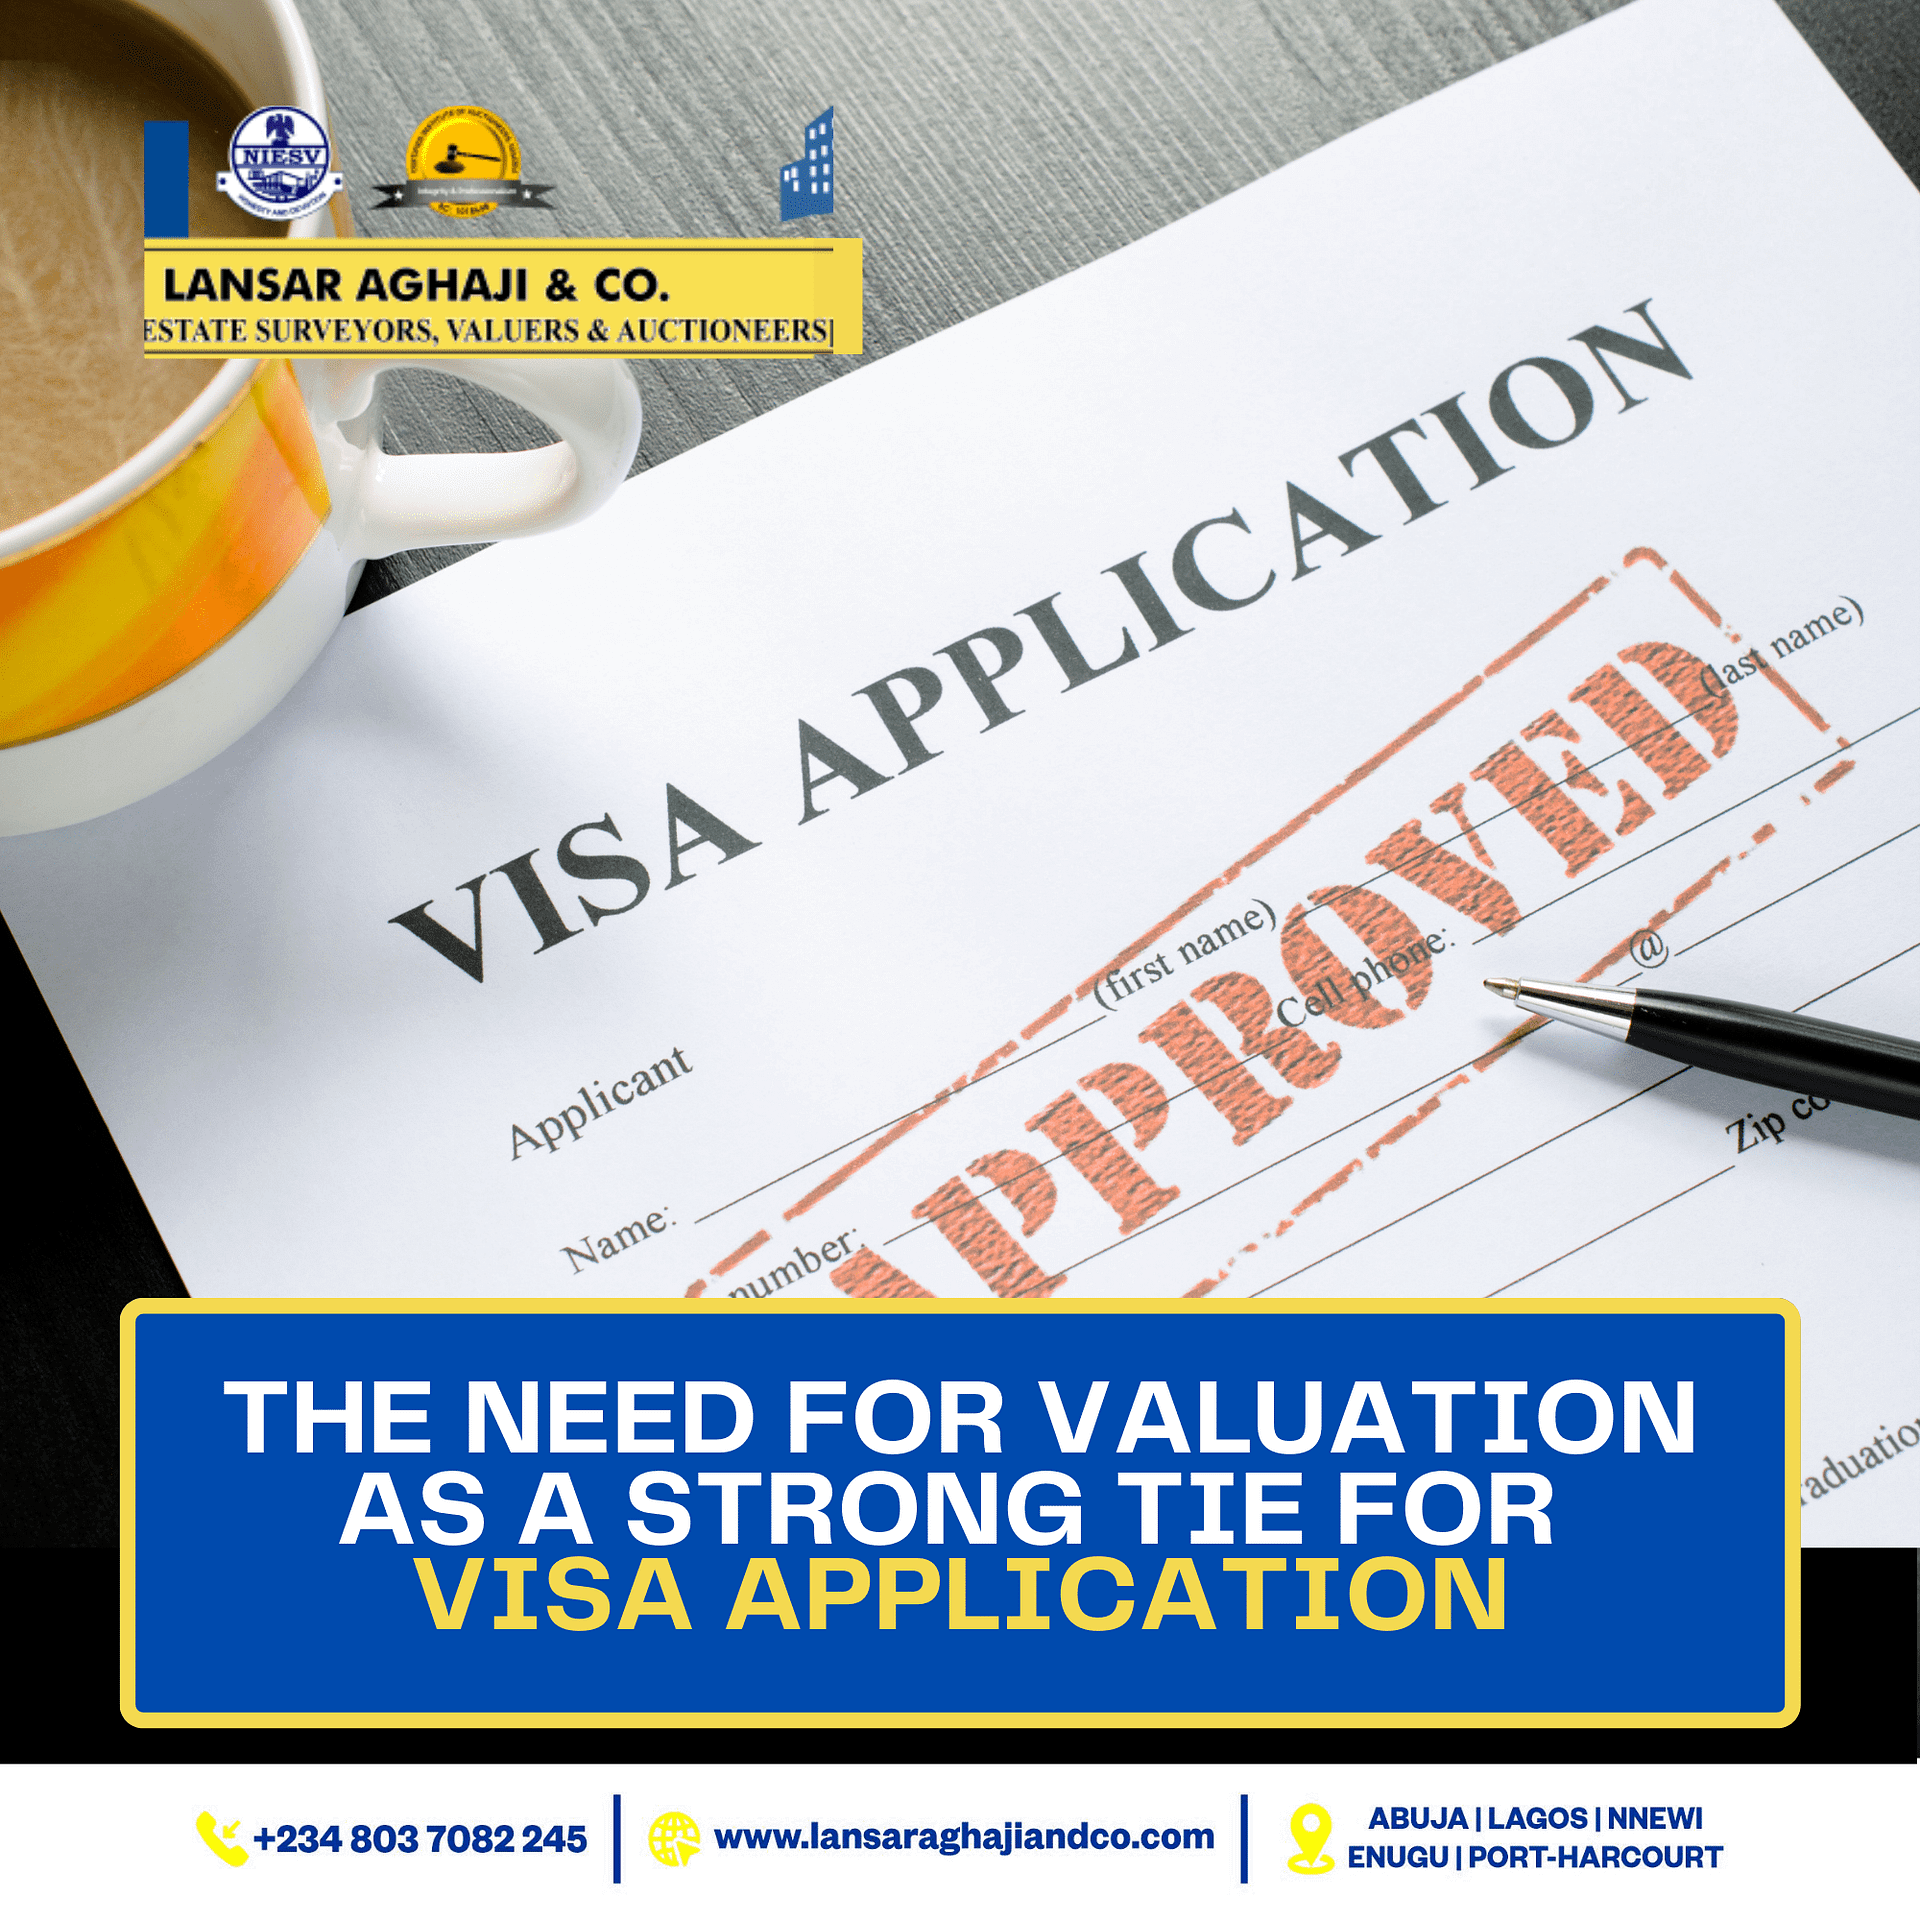 The Need for Valuation as a Strong Tie for Visa Application